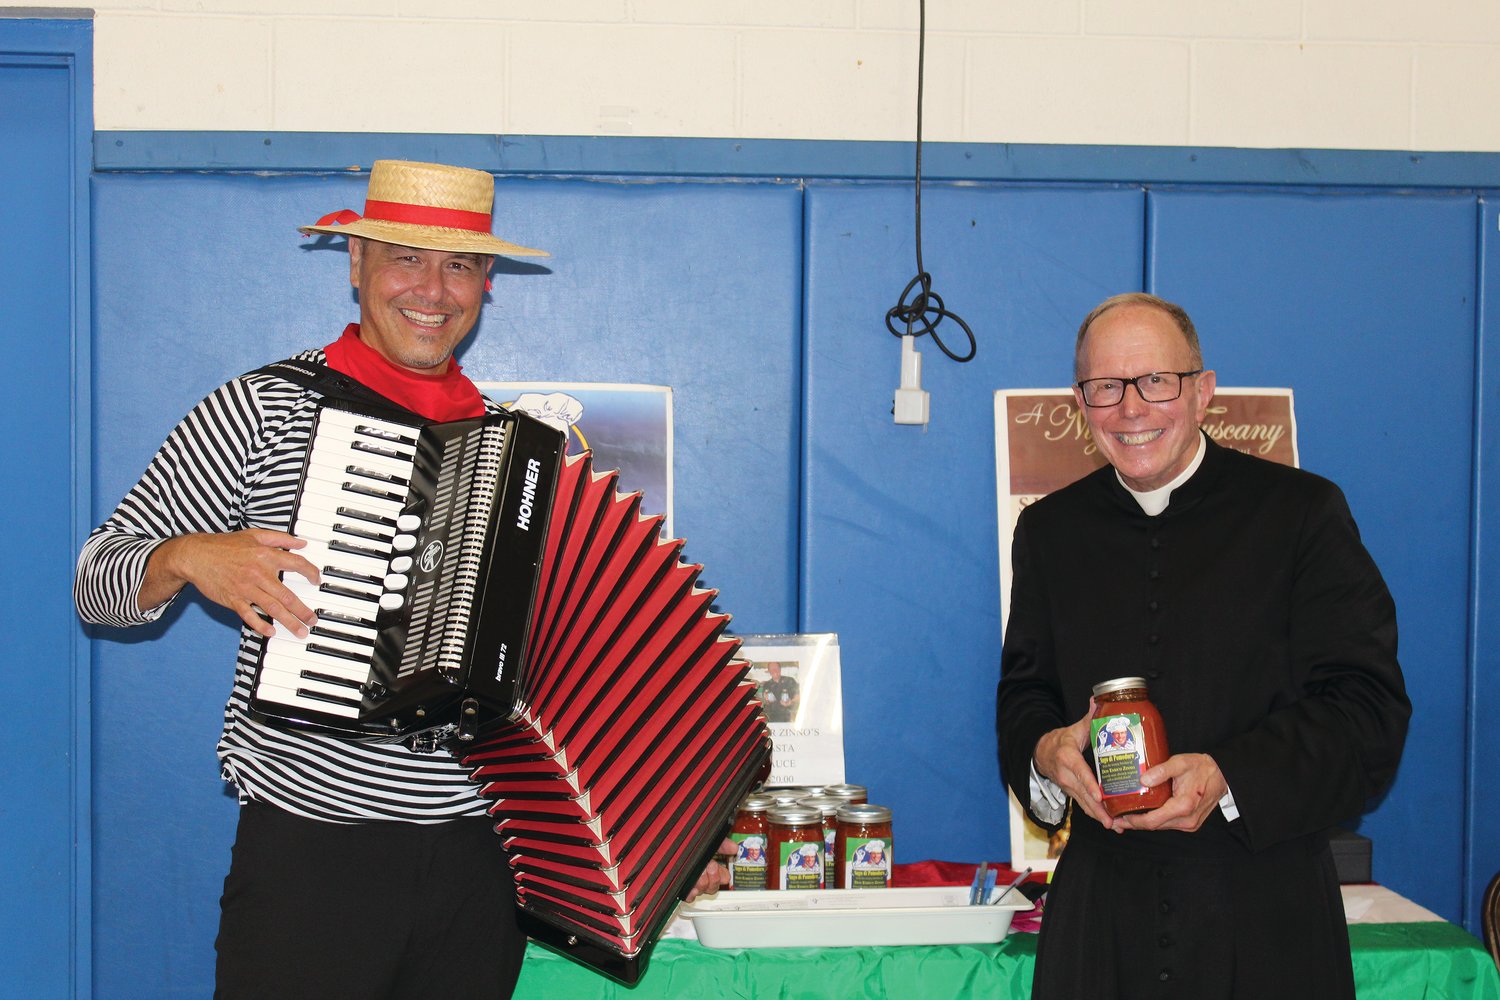 Father Zinno poses with a jar of his signature marinara sauce at the Our Lady of Mount Carmel Feast on July 17, three days before his surgery. The annual celebration, founded in 1899, is the oldest Italian festival in the diocese.